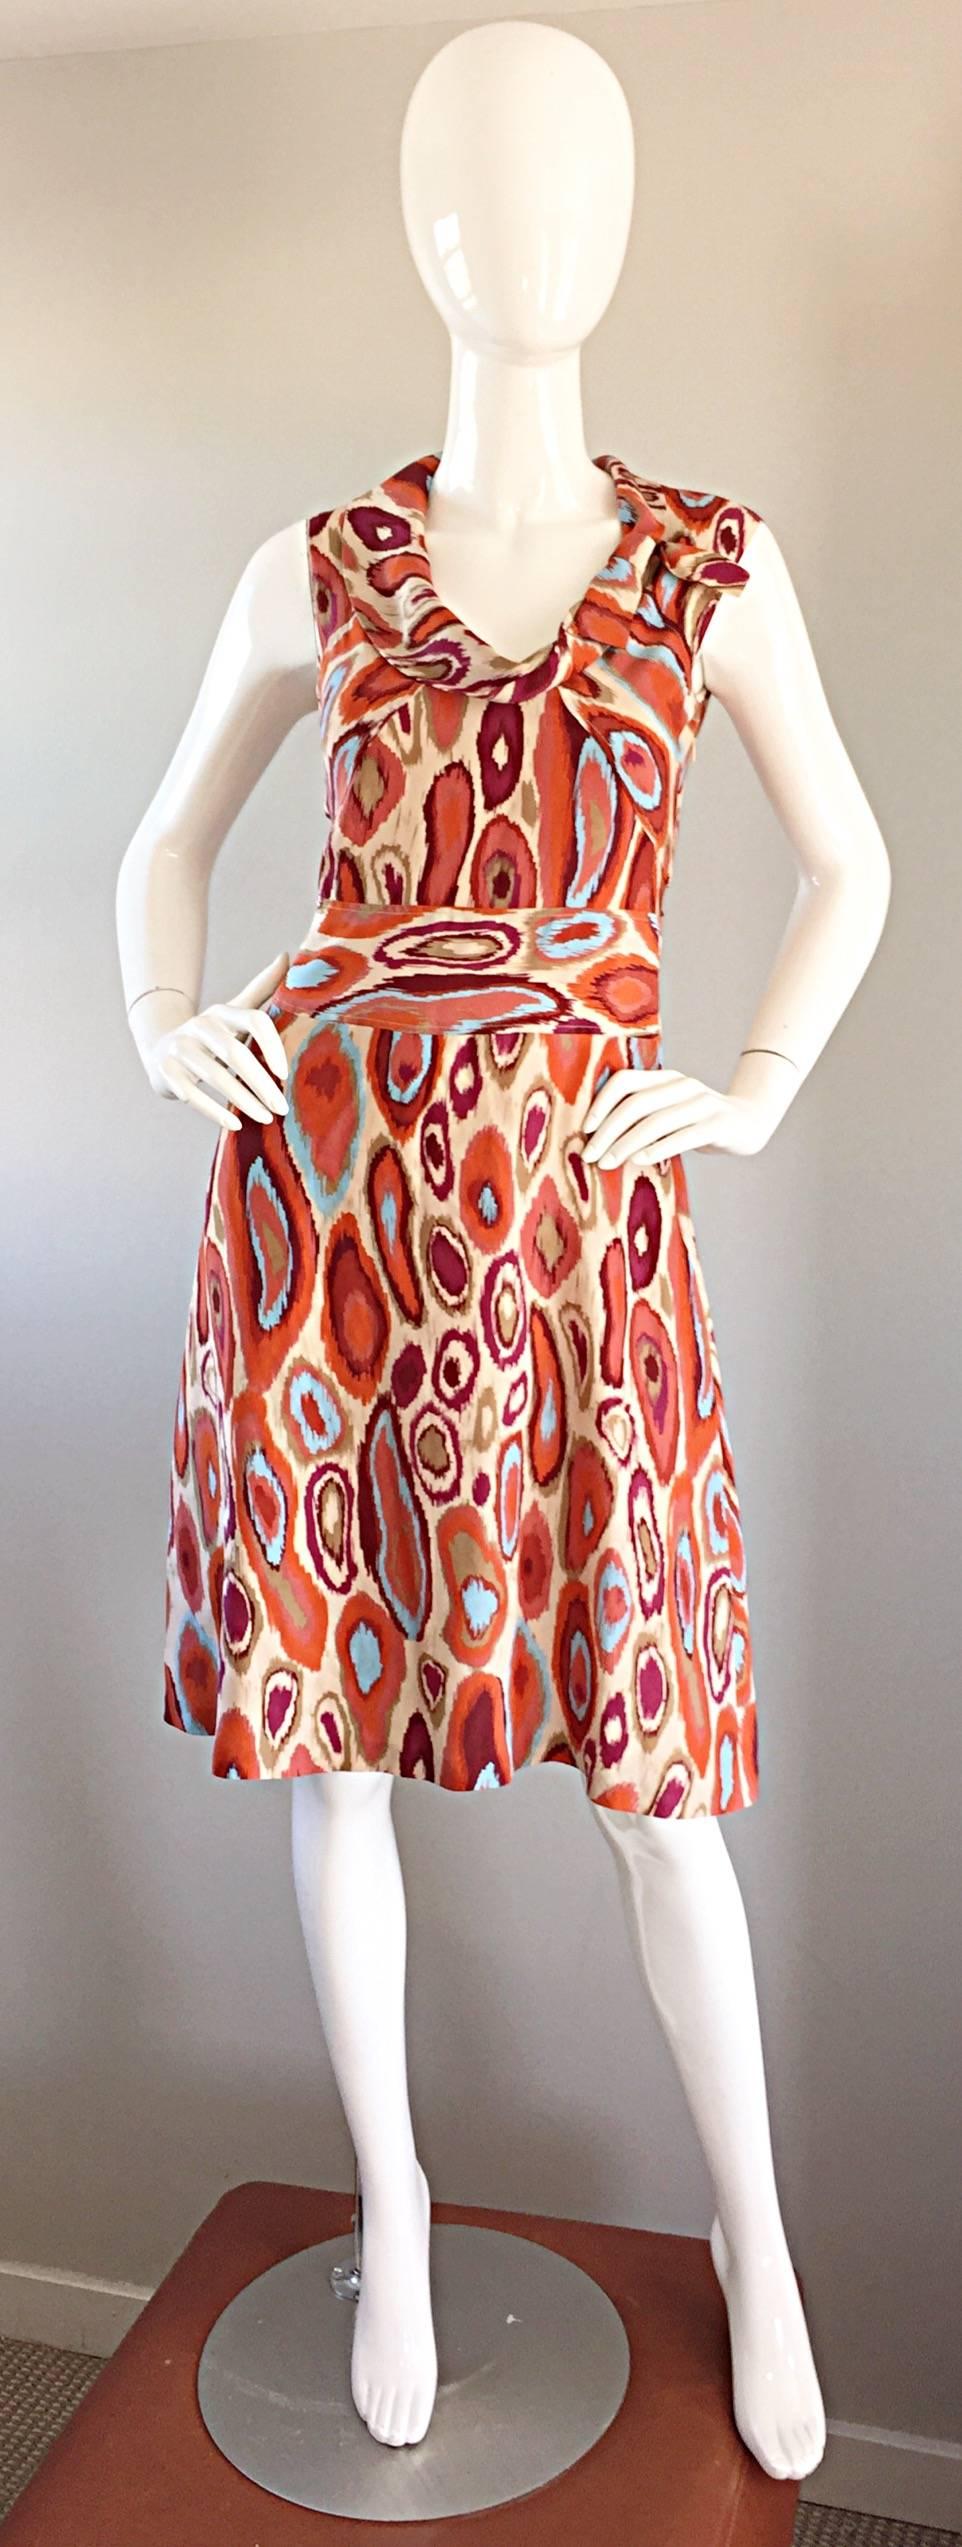 Brand new with tags CACHAREL Ikat print 1960s style silk dress! Features warm tones of burnt orange, brown, burgundy, and robins egg blue. Chic cowl neck with discreetly attached bow. Slight A-Line fit, that is super flattering on every shape. Fully